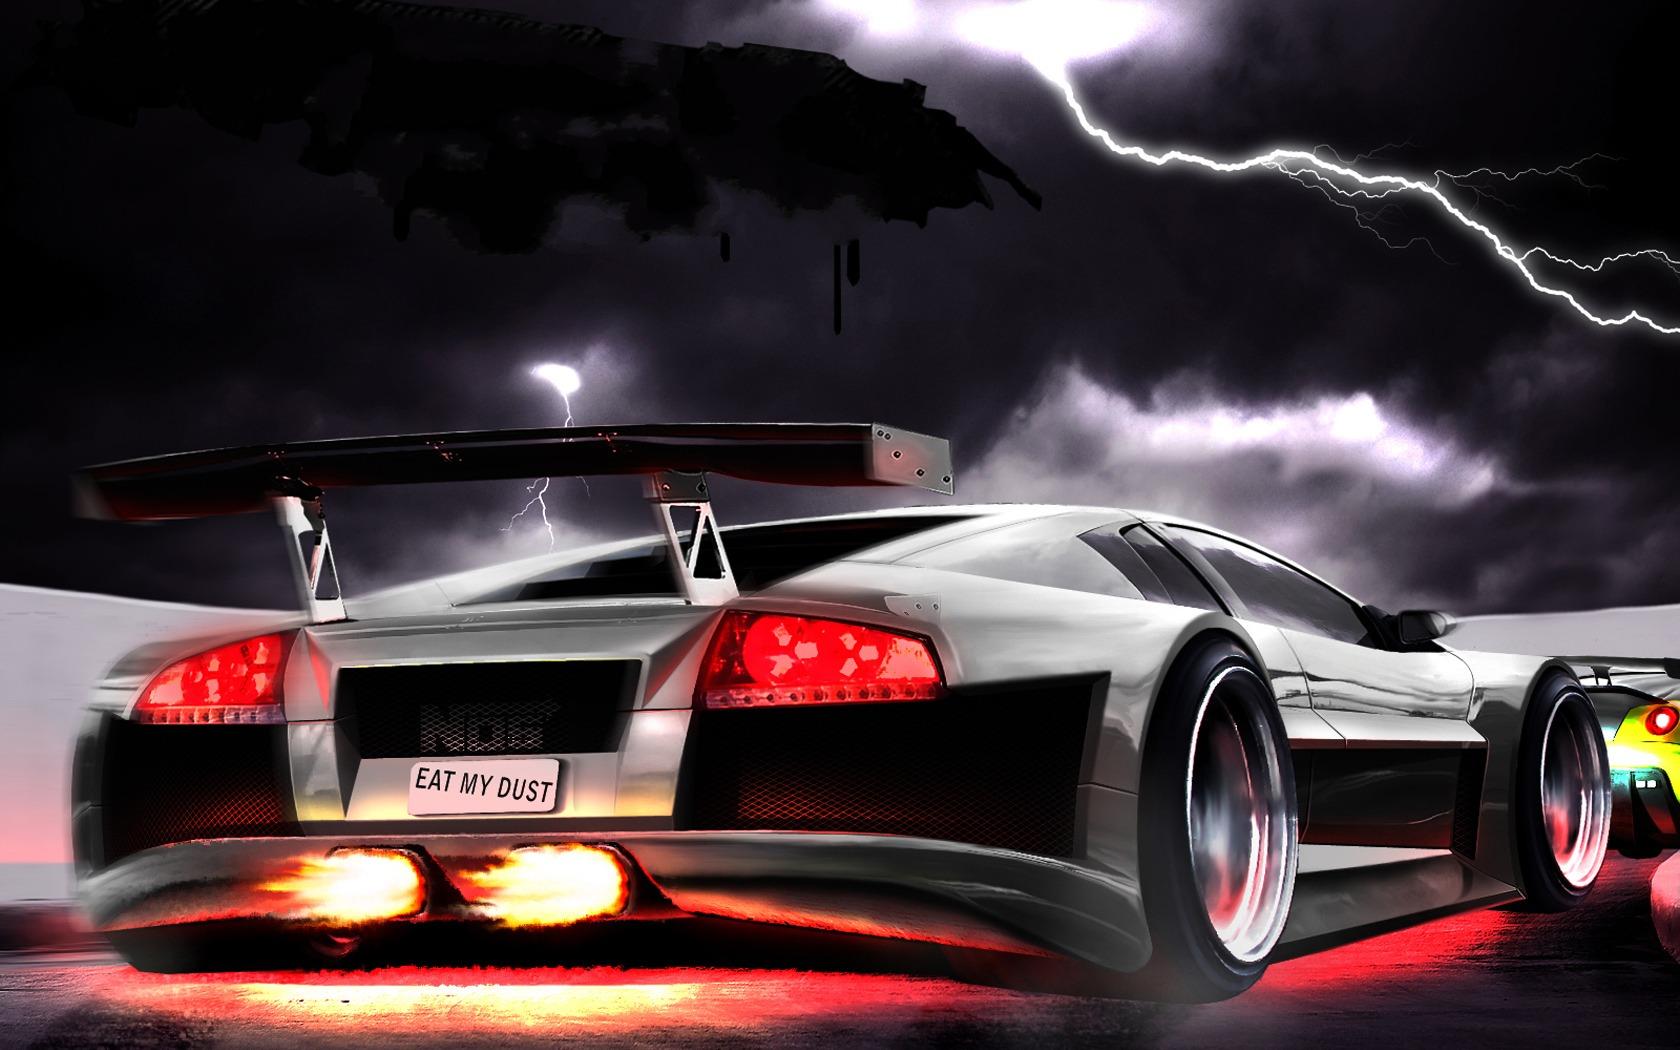 Download Wallpapers For Pc Of Cars